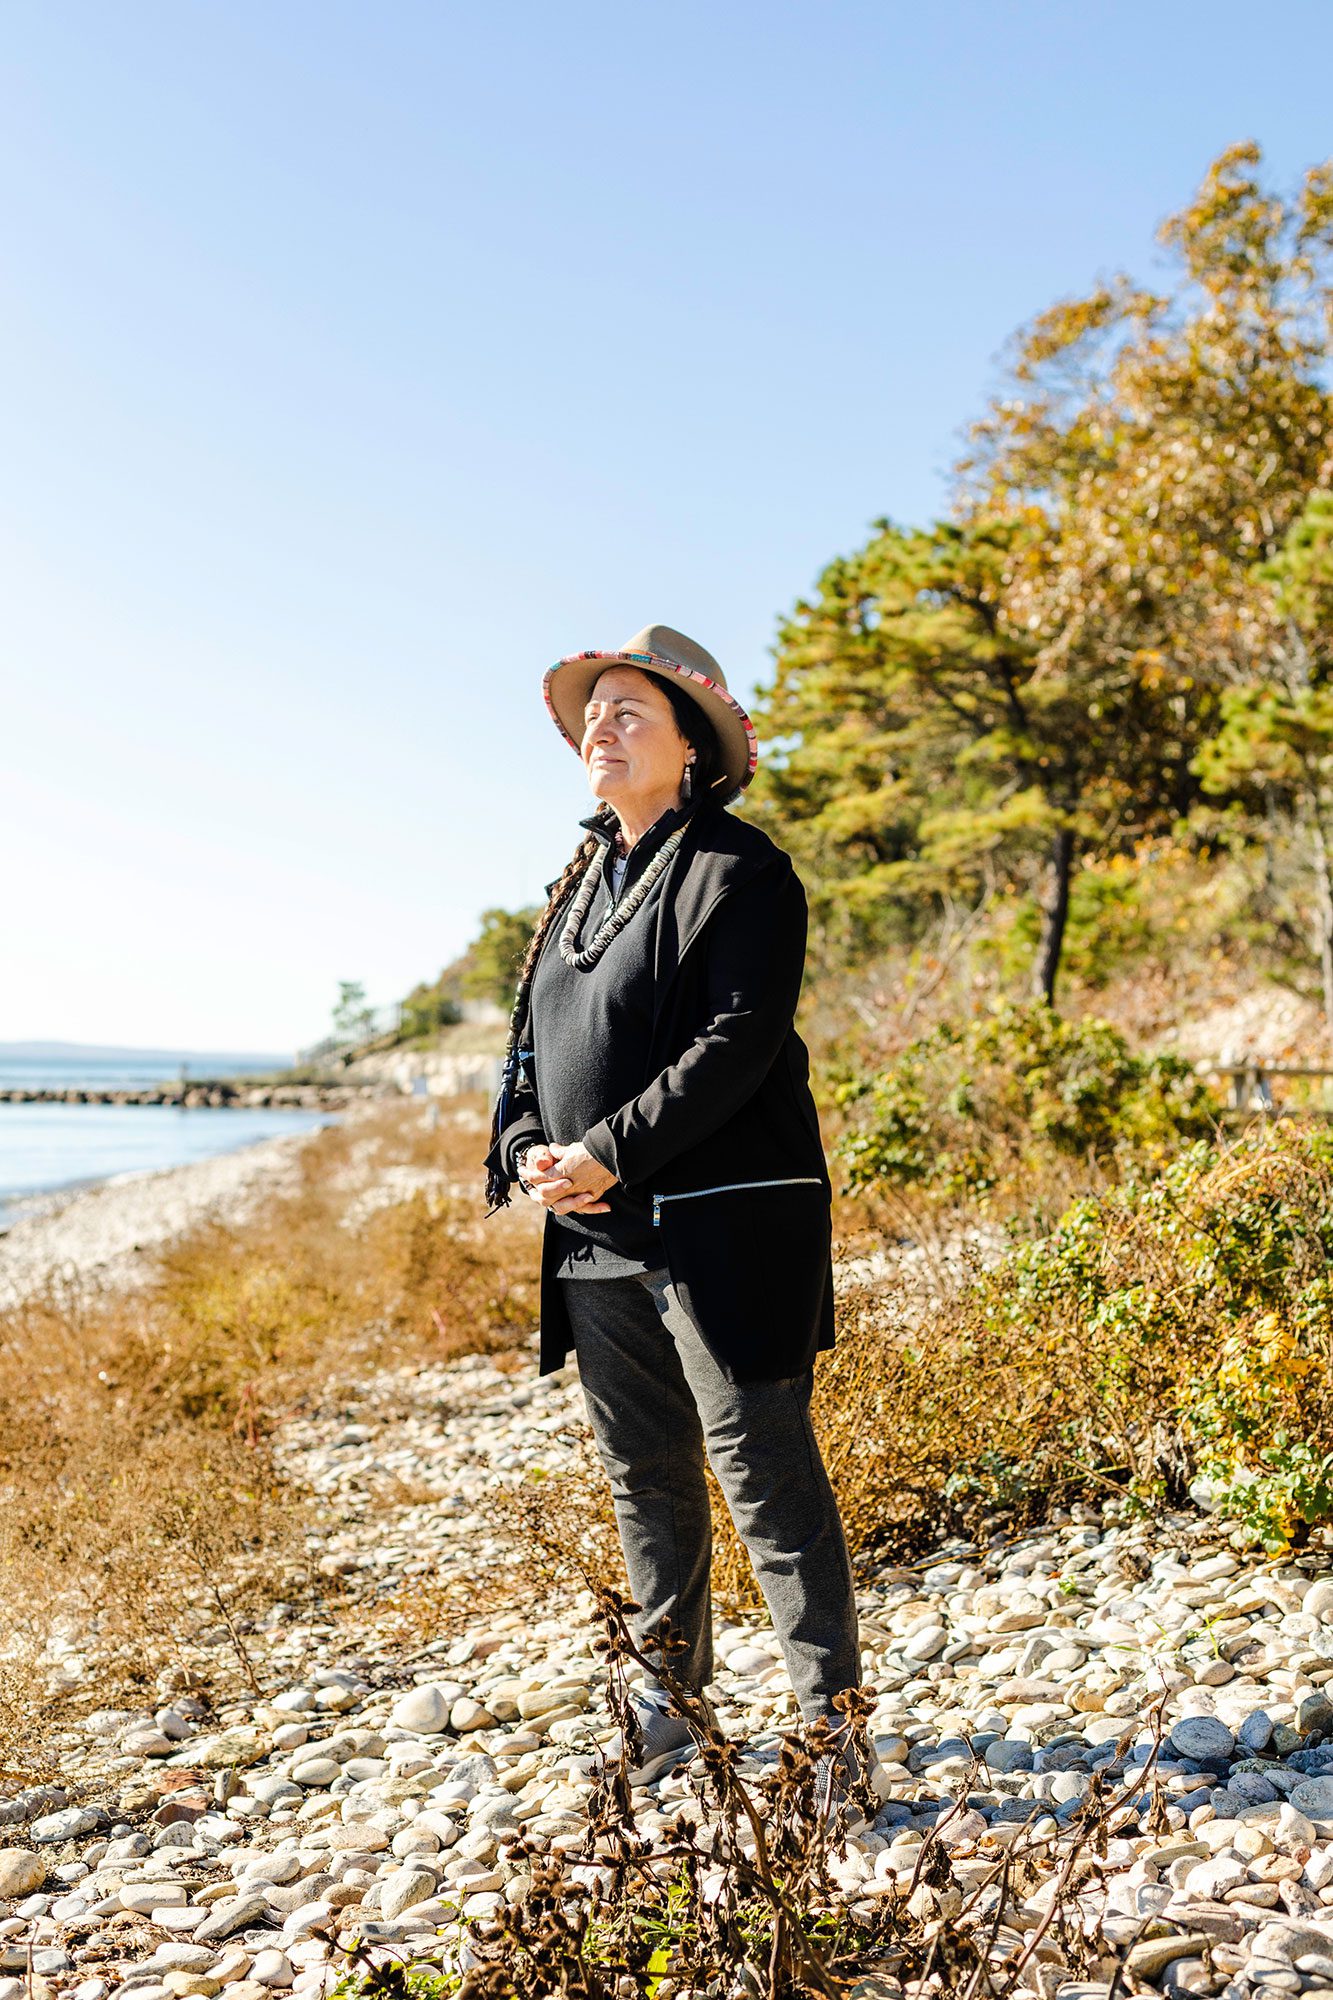 Leslie Jonas takes in the sunlight on Quissett Beach in Woods Hole. (Photo by Daniel Hentz, © Woods Hole Oceanographic Institution)